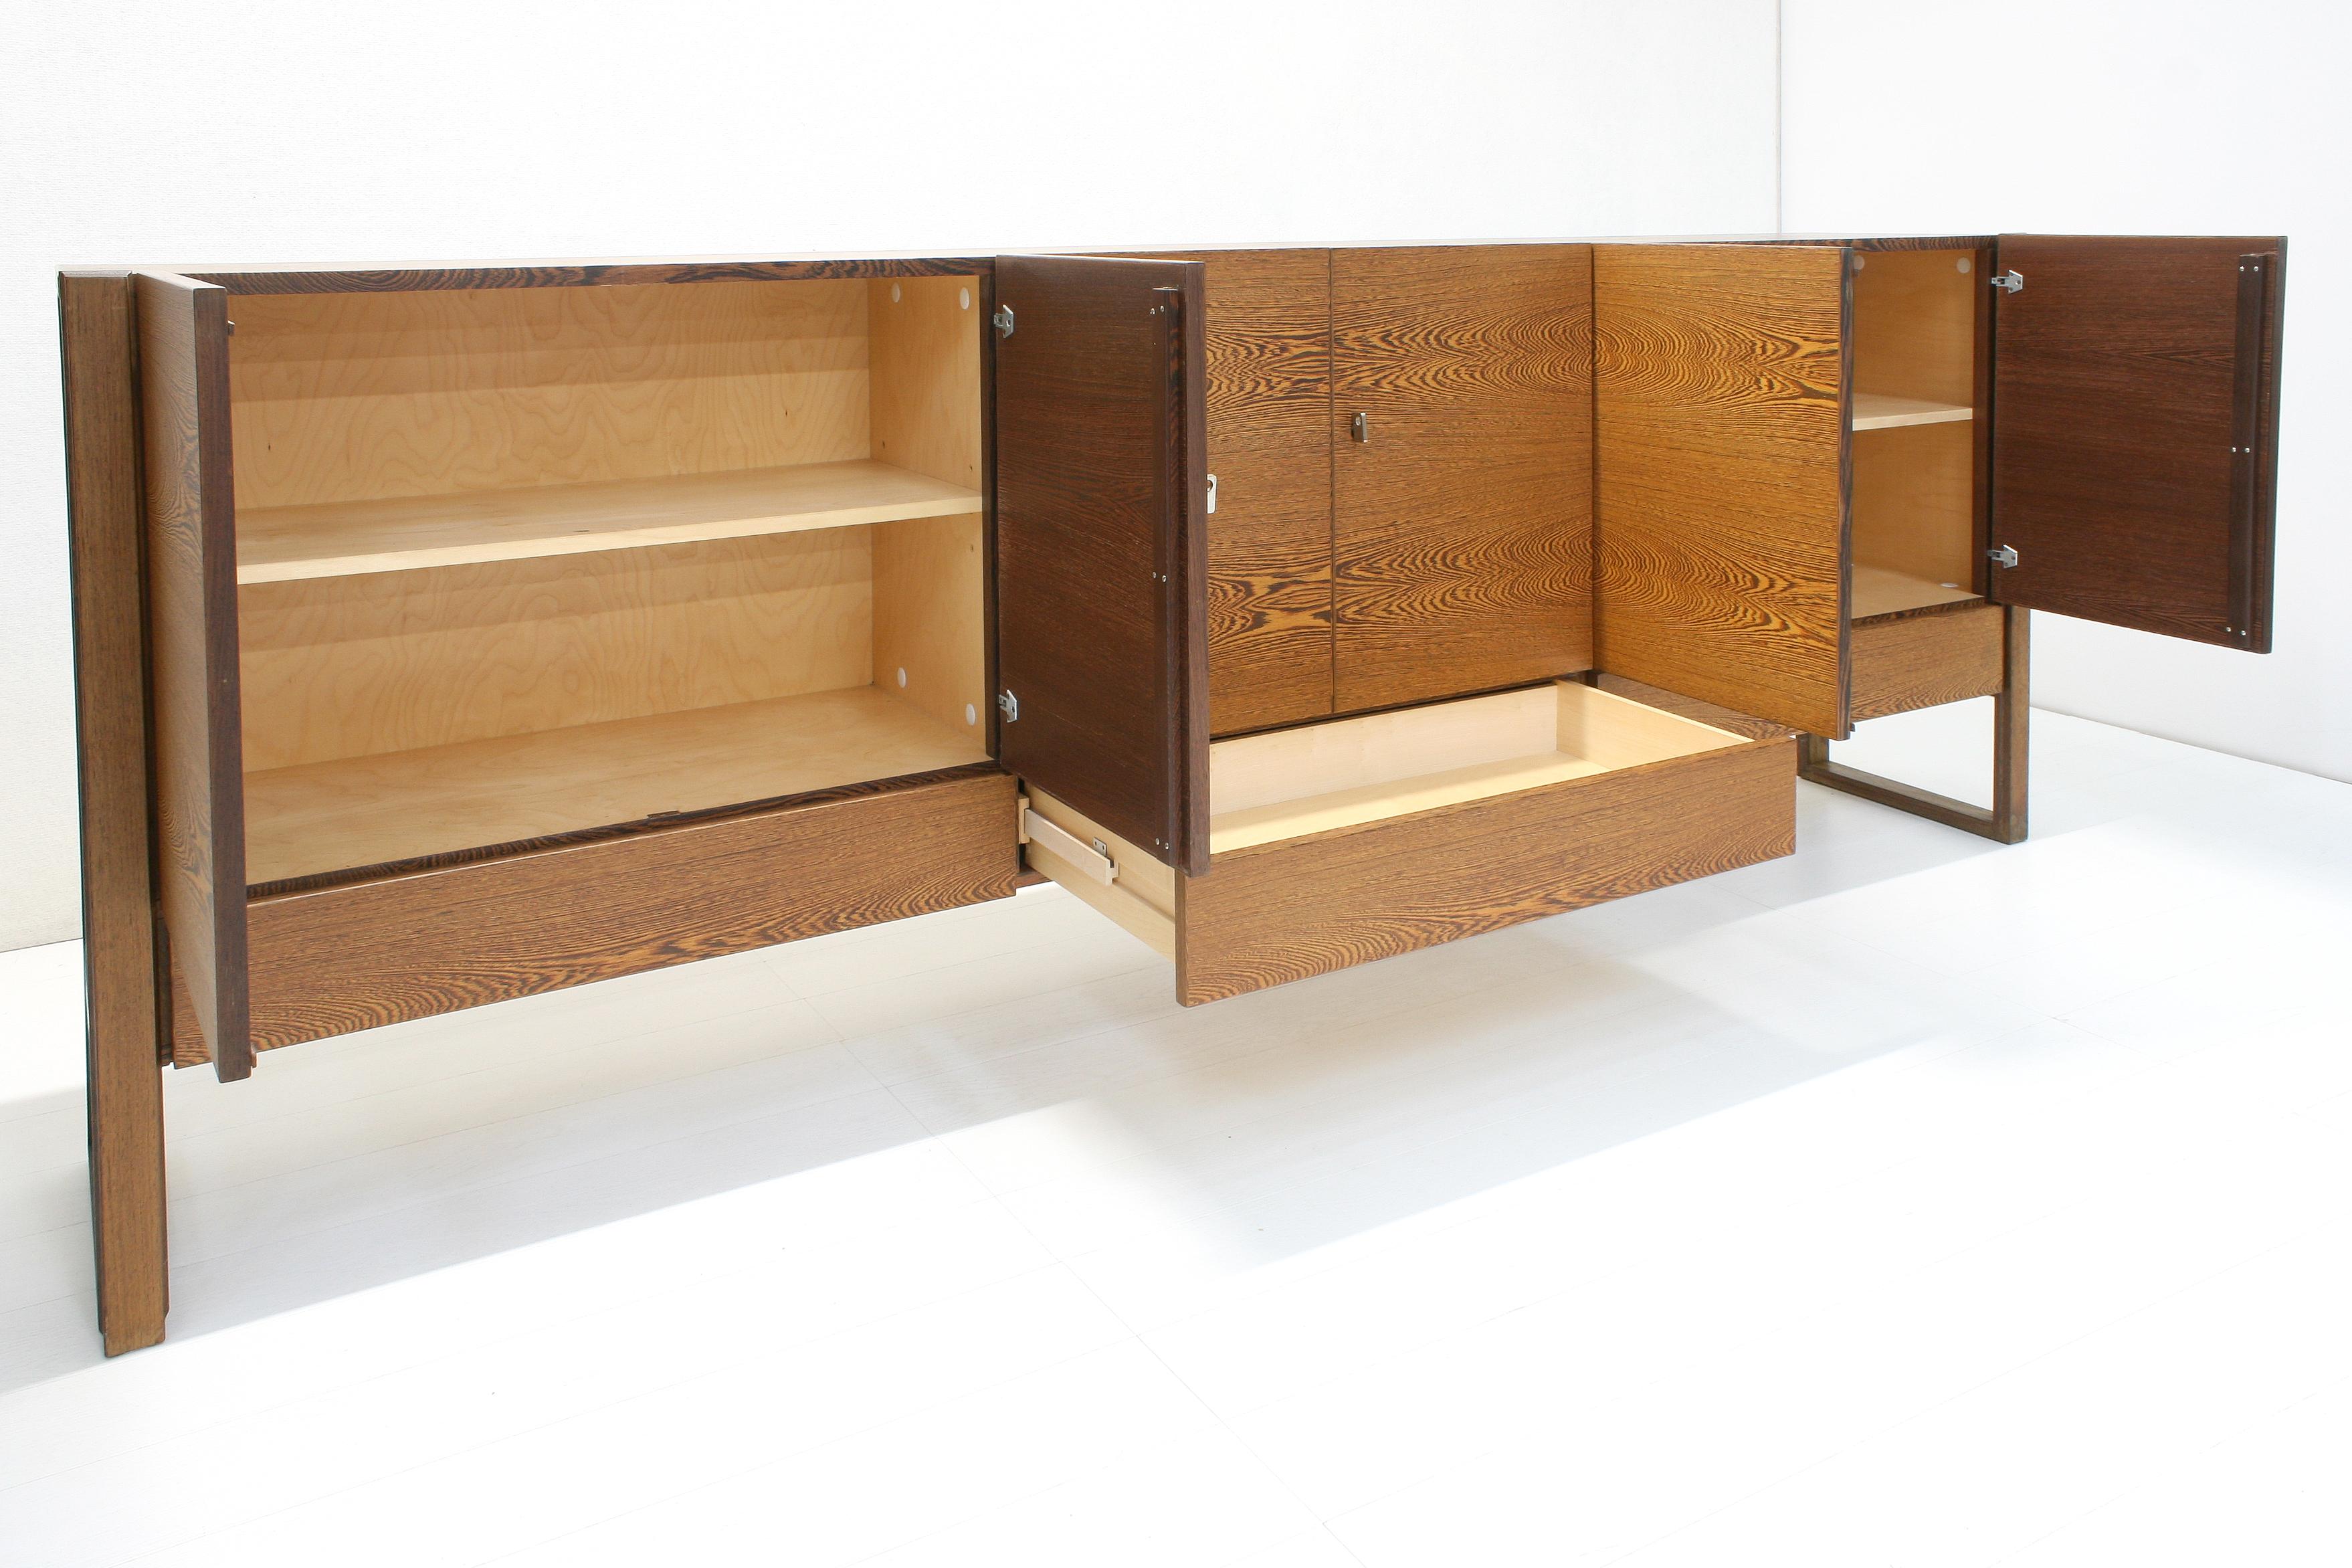 Sled Base Sideboard in Wengé from N-Line International, Belgium, 1970s For Sale 10